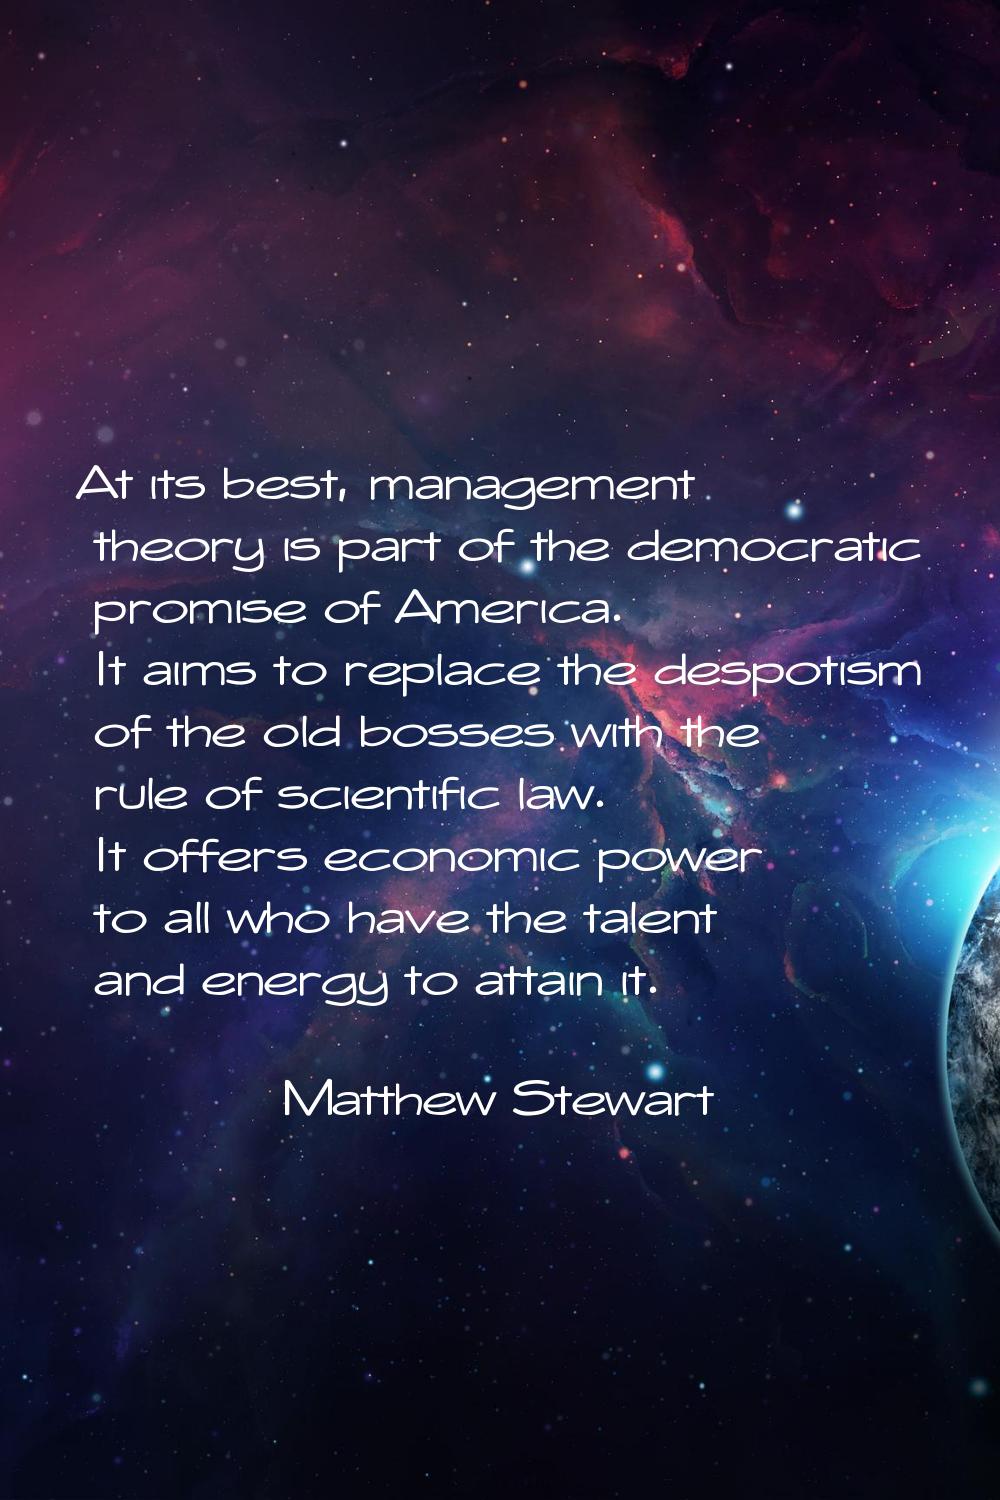 At its best, management theory is part of the democratic promise of America. It aims to replace the